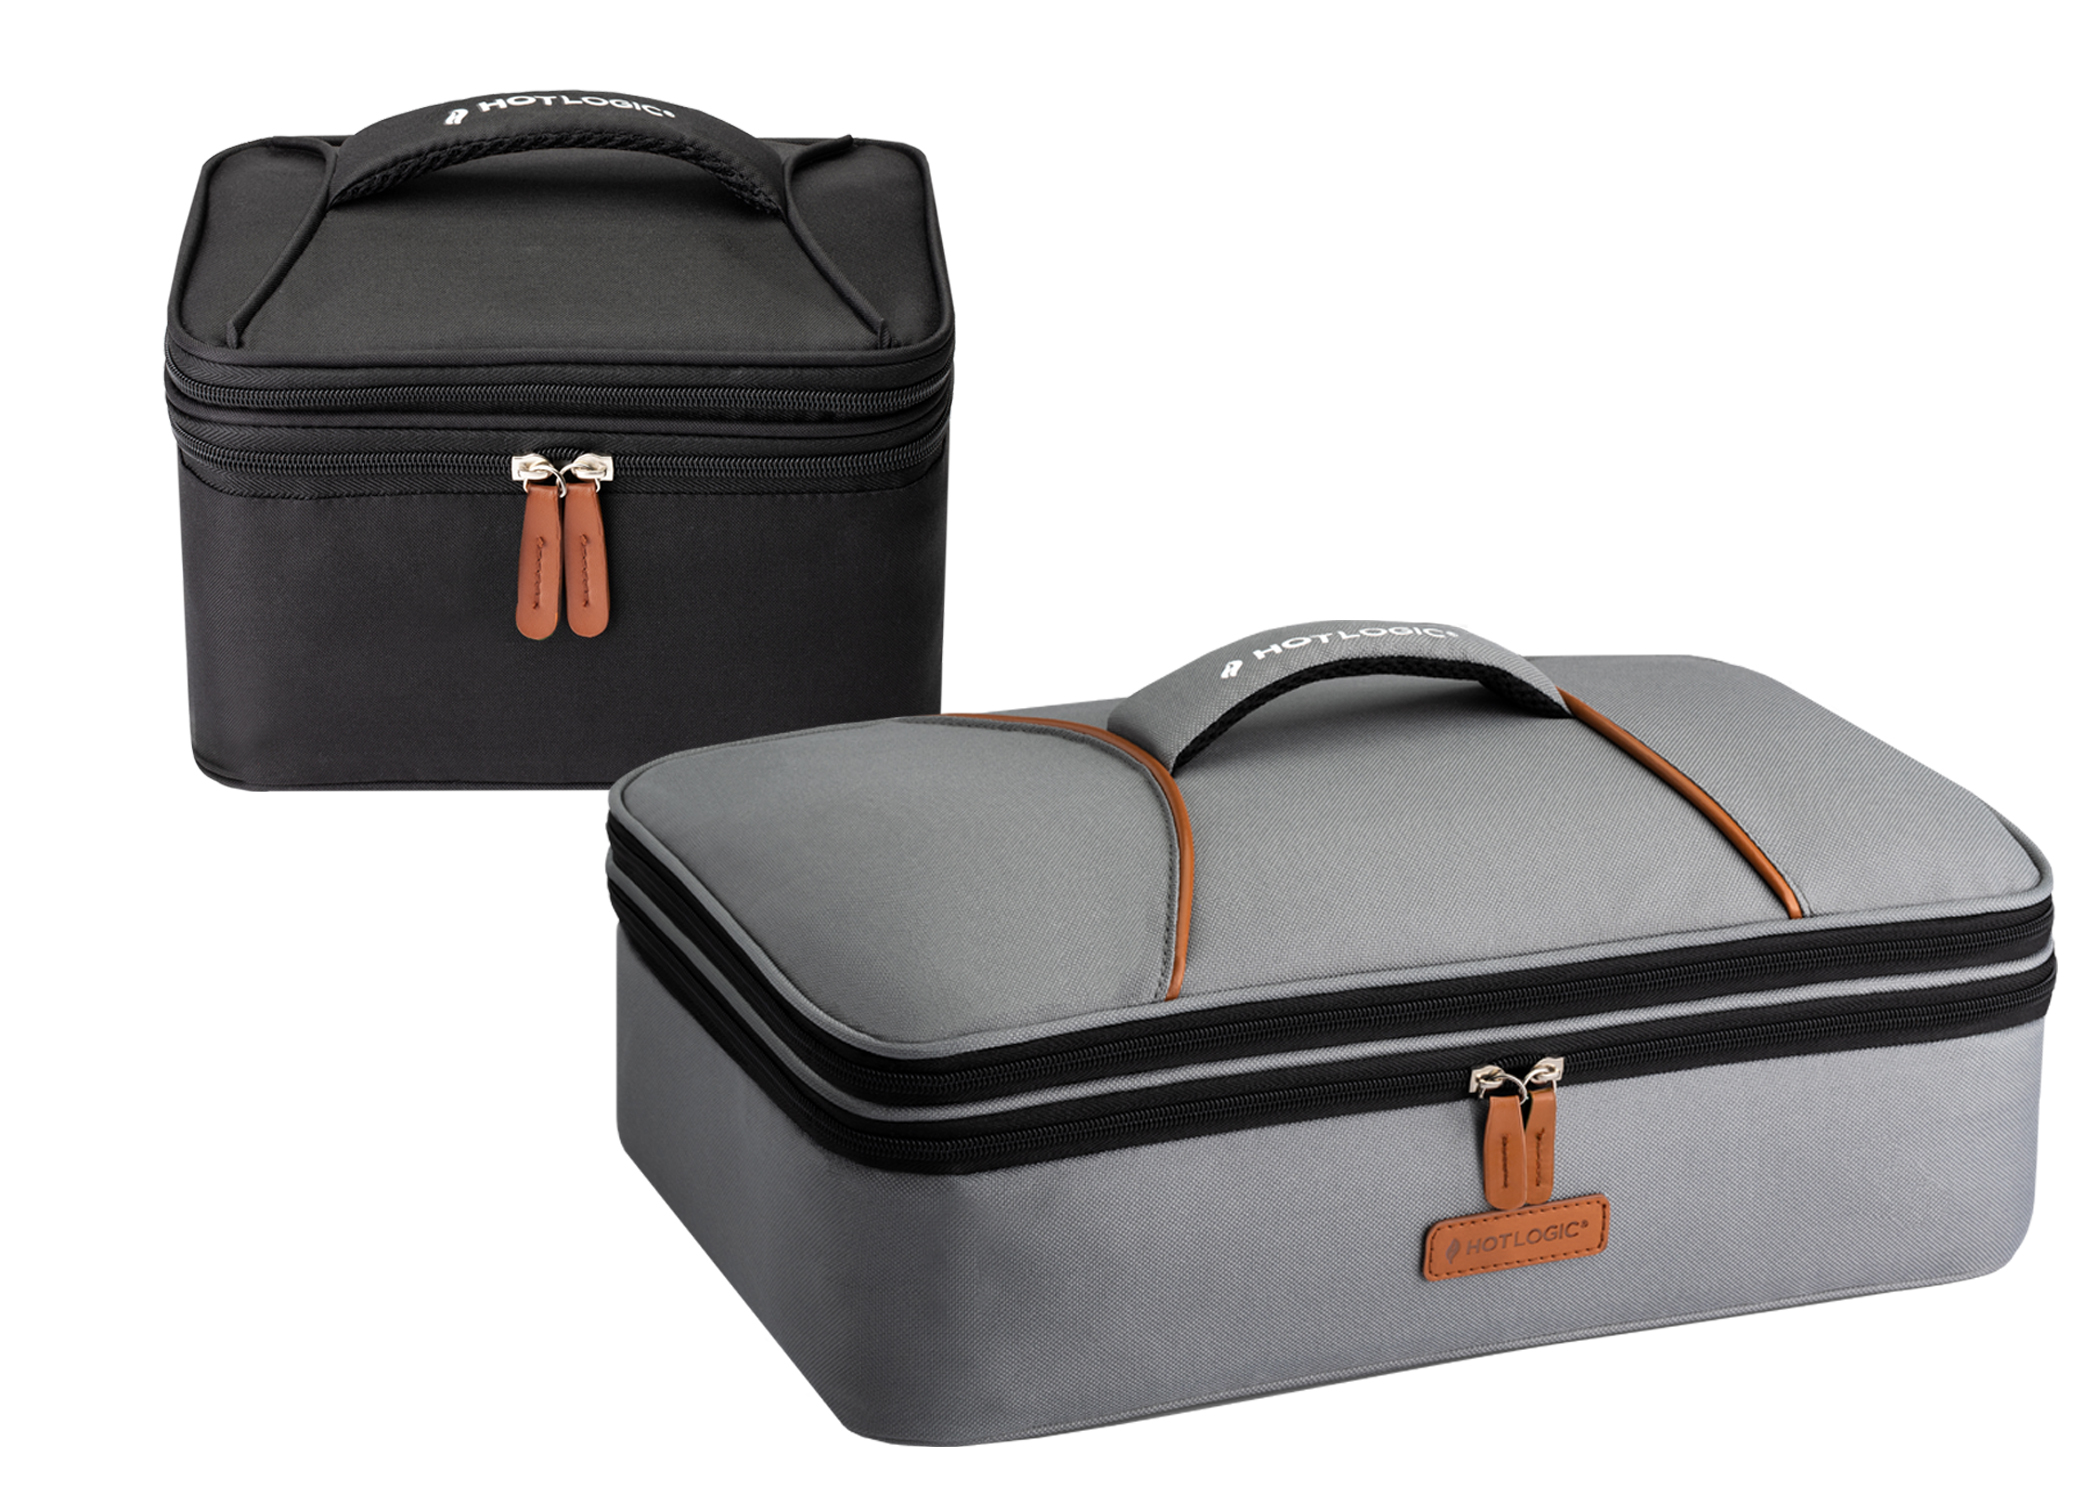 HOTLOGIC Mini and Max Ovens XP offer a new built-in expandable insulated carrying bag with the added convenience and room to store non-perishable items, condiments and paperware on top with the same HeatDeck™ Technology on the bottom. Features extra padded handles for easy carrying and added leather details. 

The Mini XP is also available in a 12V model, a favorite for commuters, camping, homegating/tailgating and weekend rentals (Available in seven colors). The Max XP comes in a 9" x 13" and is ideal for larger serving sizes and all types of gatherings (Available in six colors and prints).
